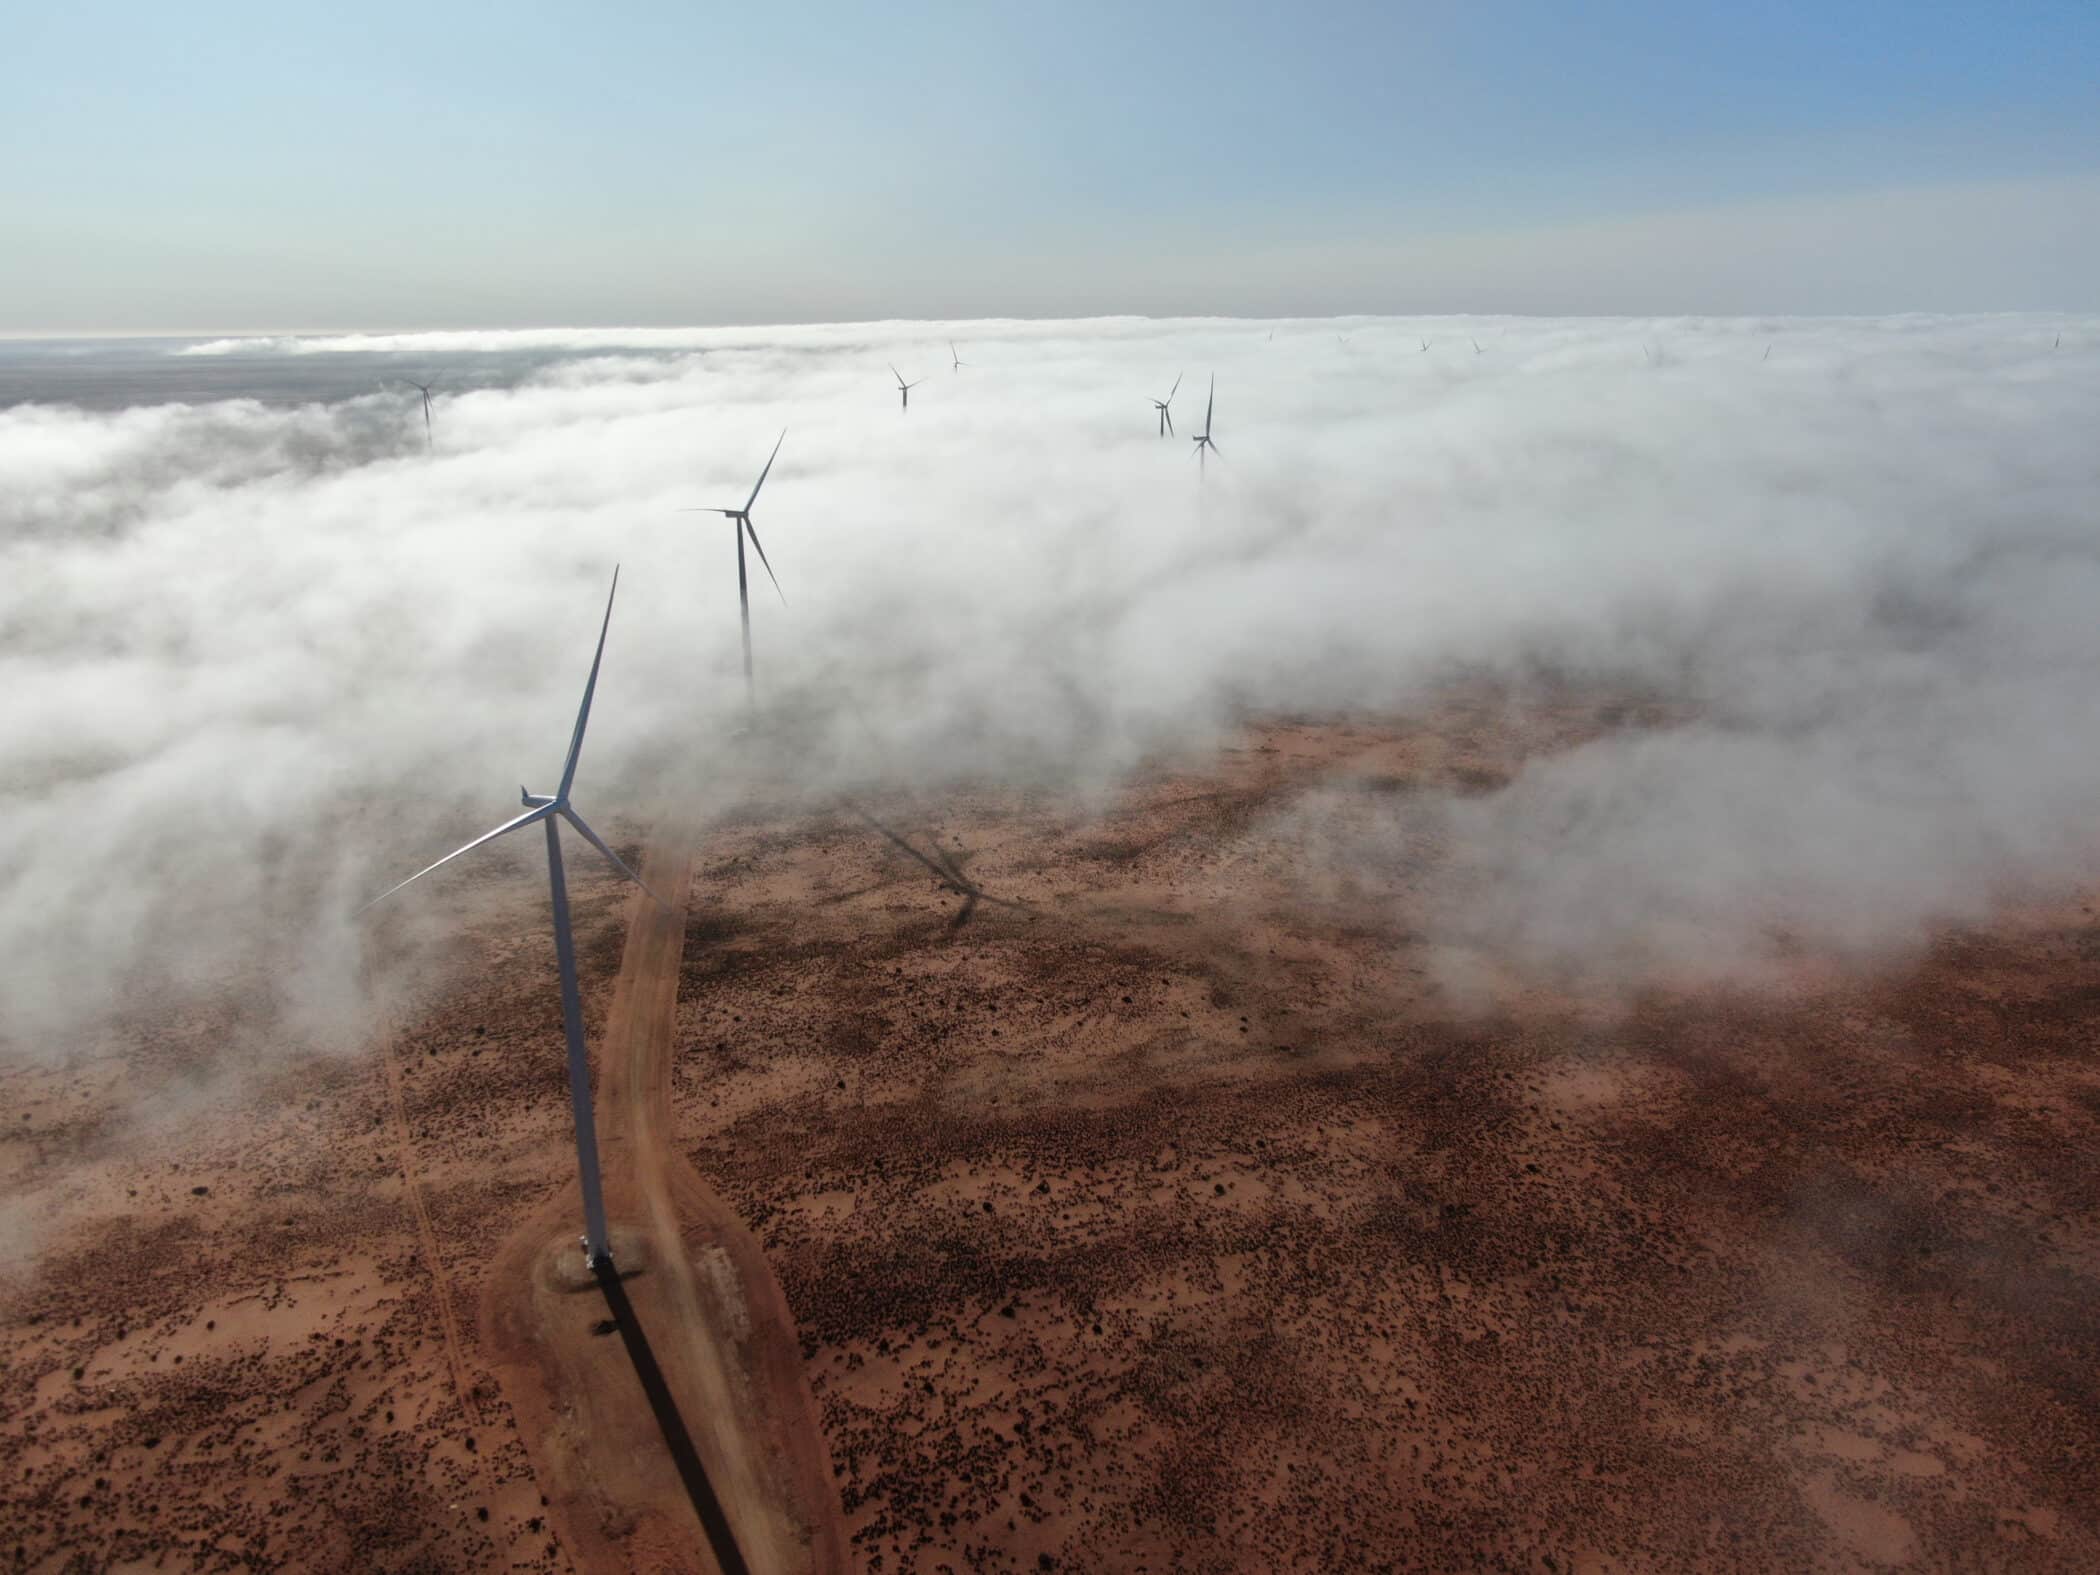 image of fog clouds covering south african desert plain with onshore wind turbines showing above the clouds